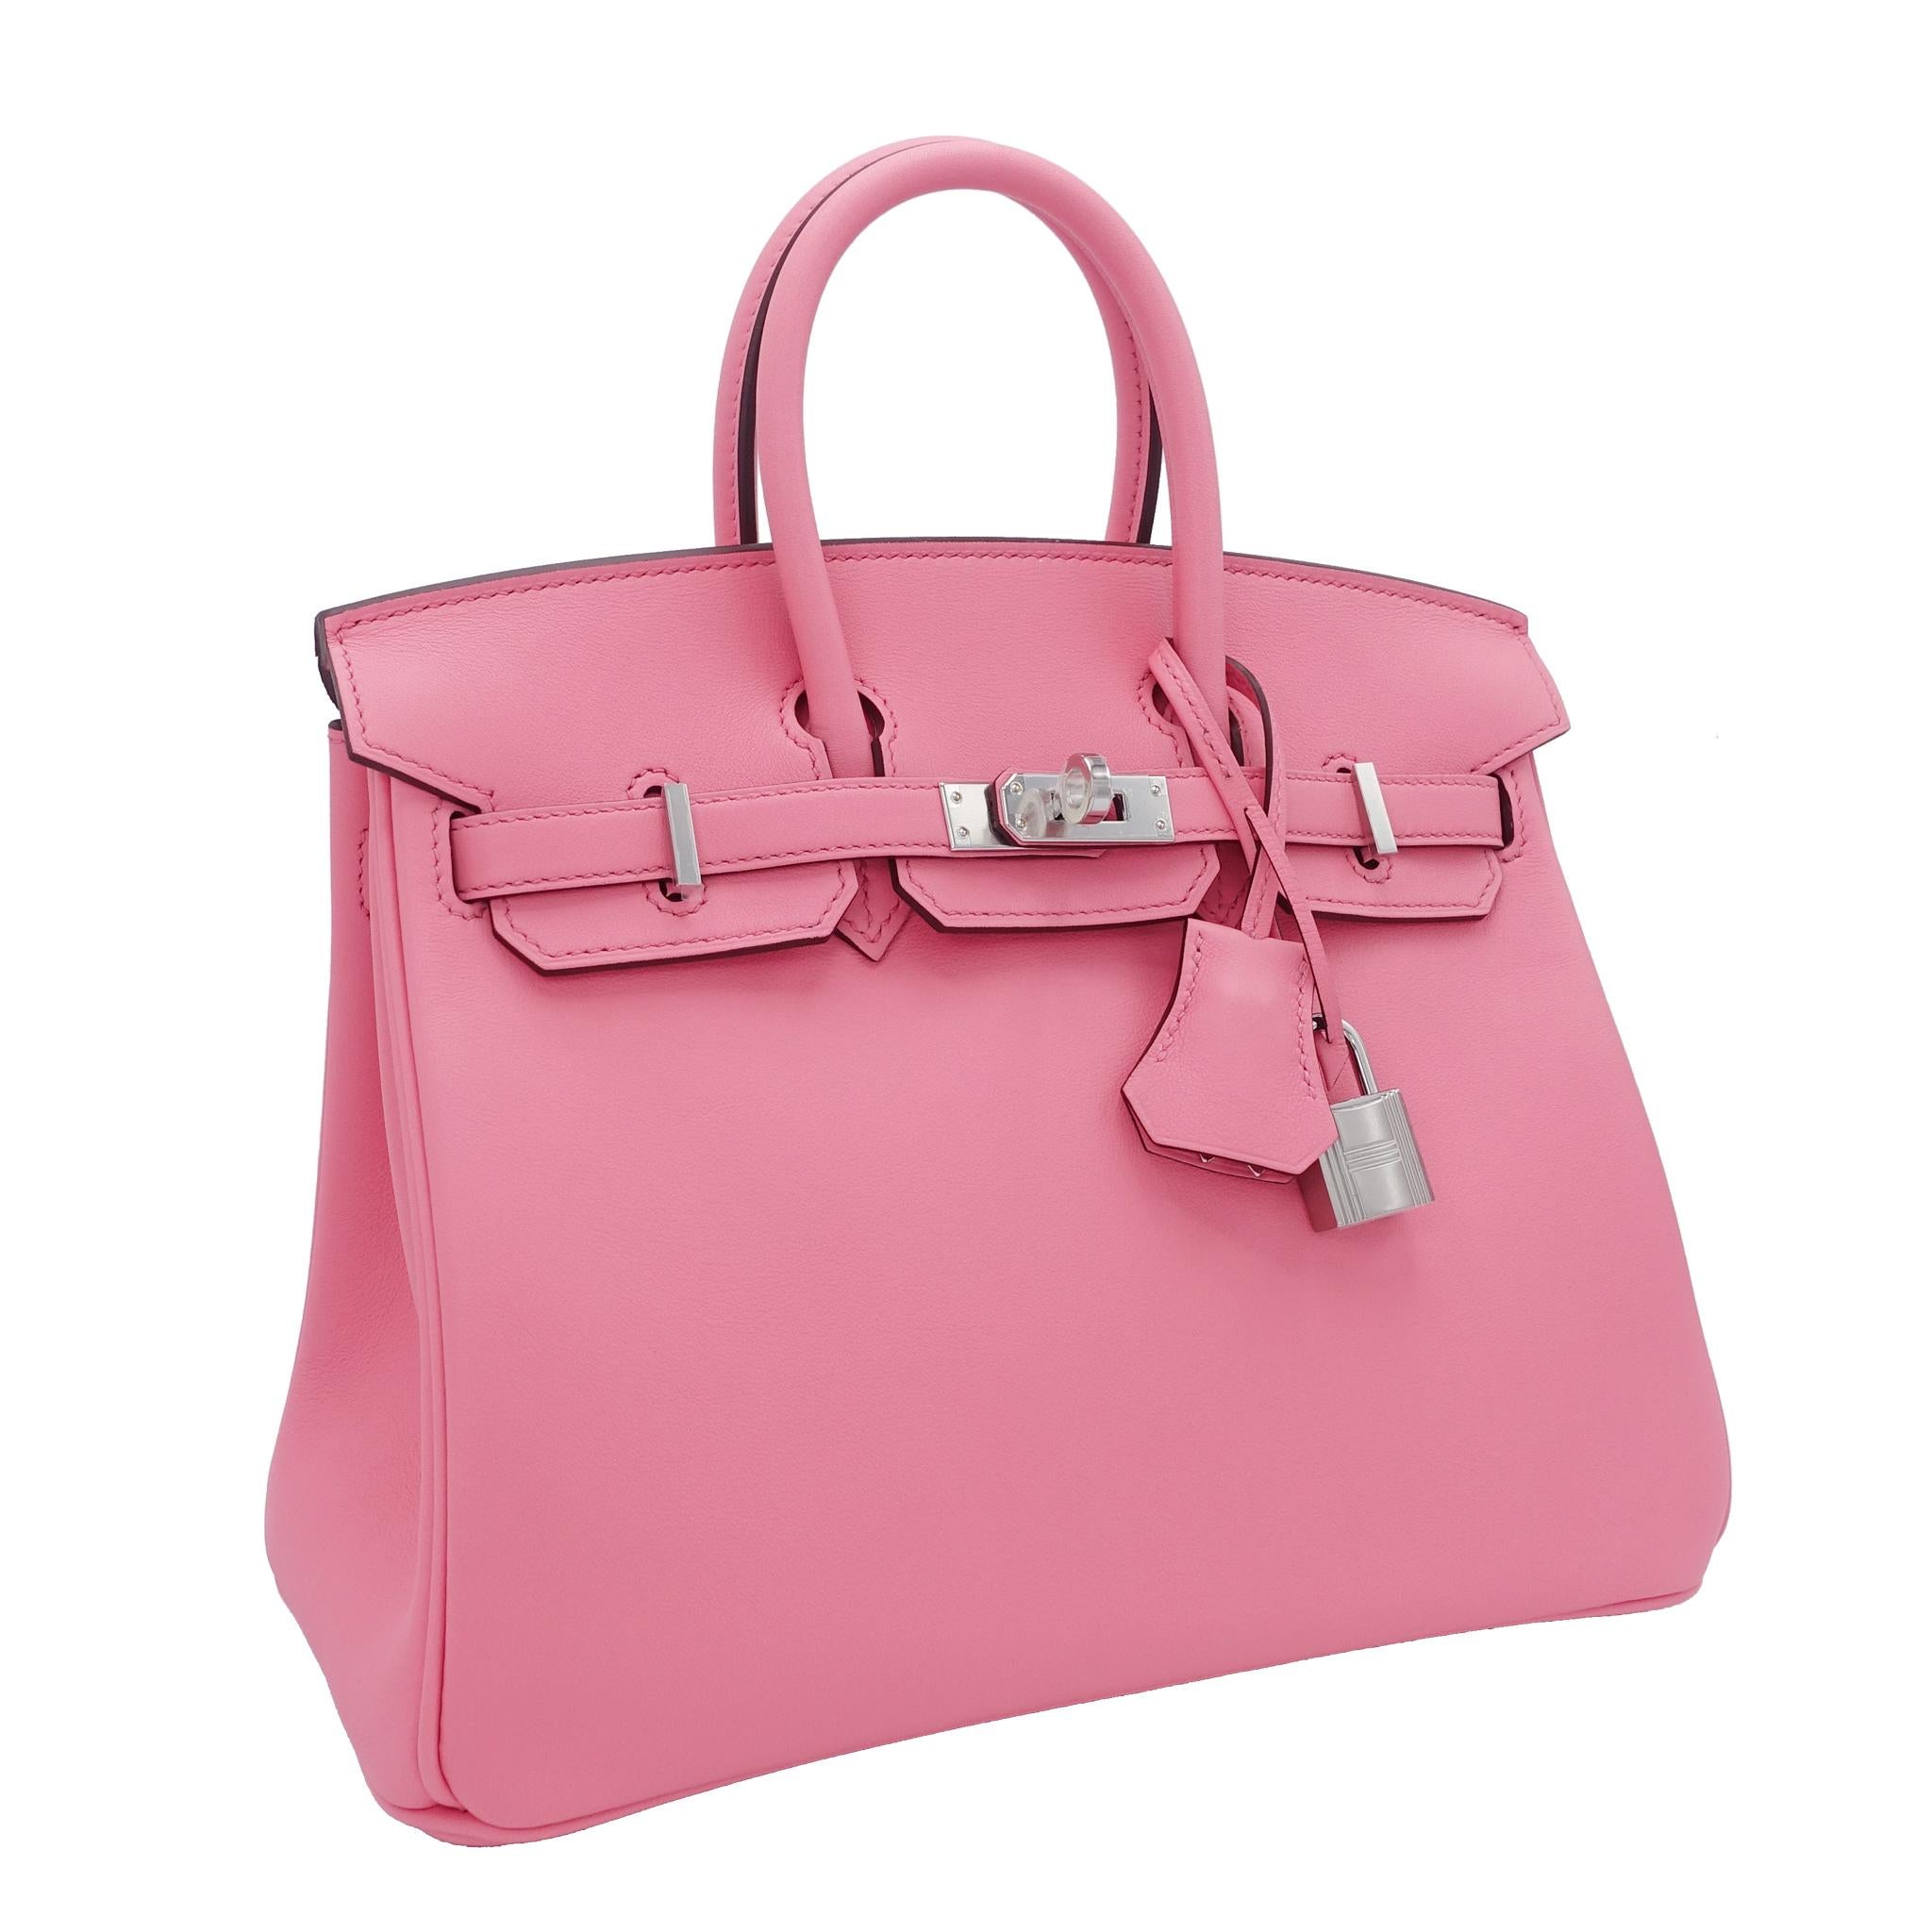 Brand: Hermès 
Style: Birkin 
Size: 25cm
Color: Rose Ete
Leather: Swift
Hardware: Palladium
Year: 2020 Y

Condition: Pristine, never carried: The item has never been carried and is in pristine condition complete with all accessories.

Accompanied